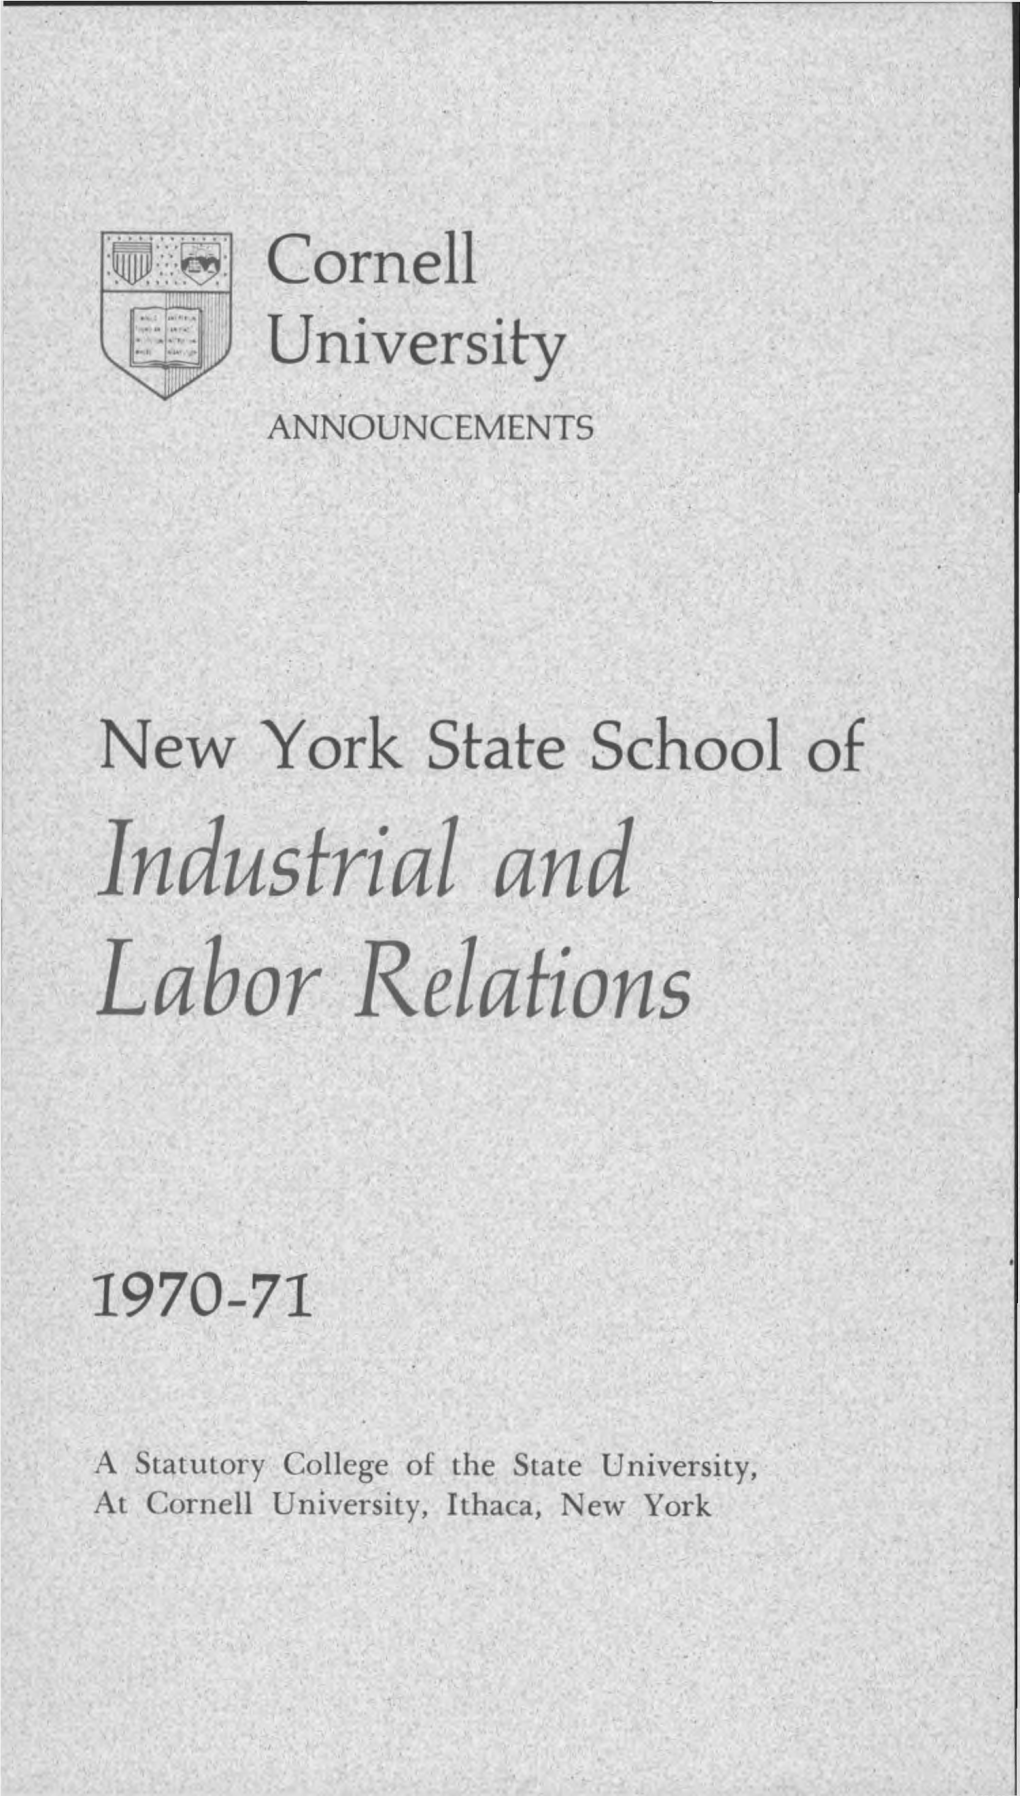 Industrial and Labor Relations